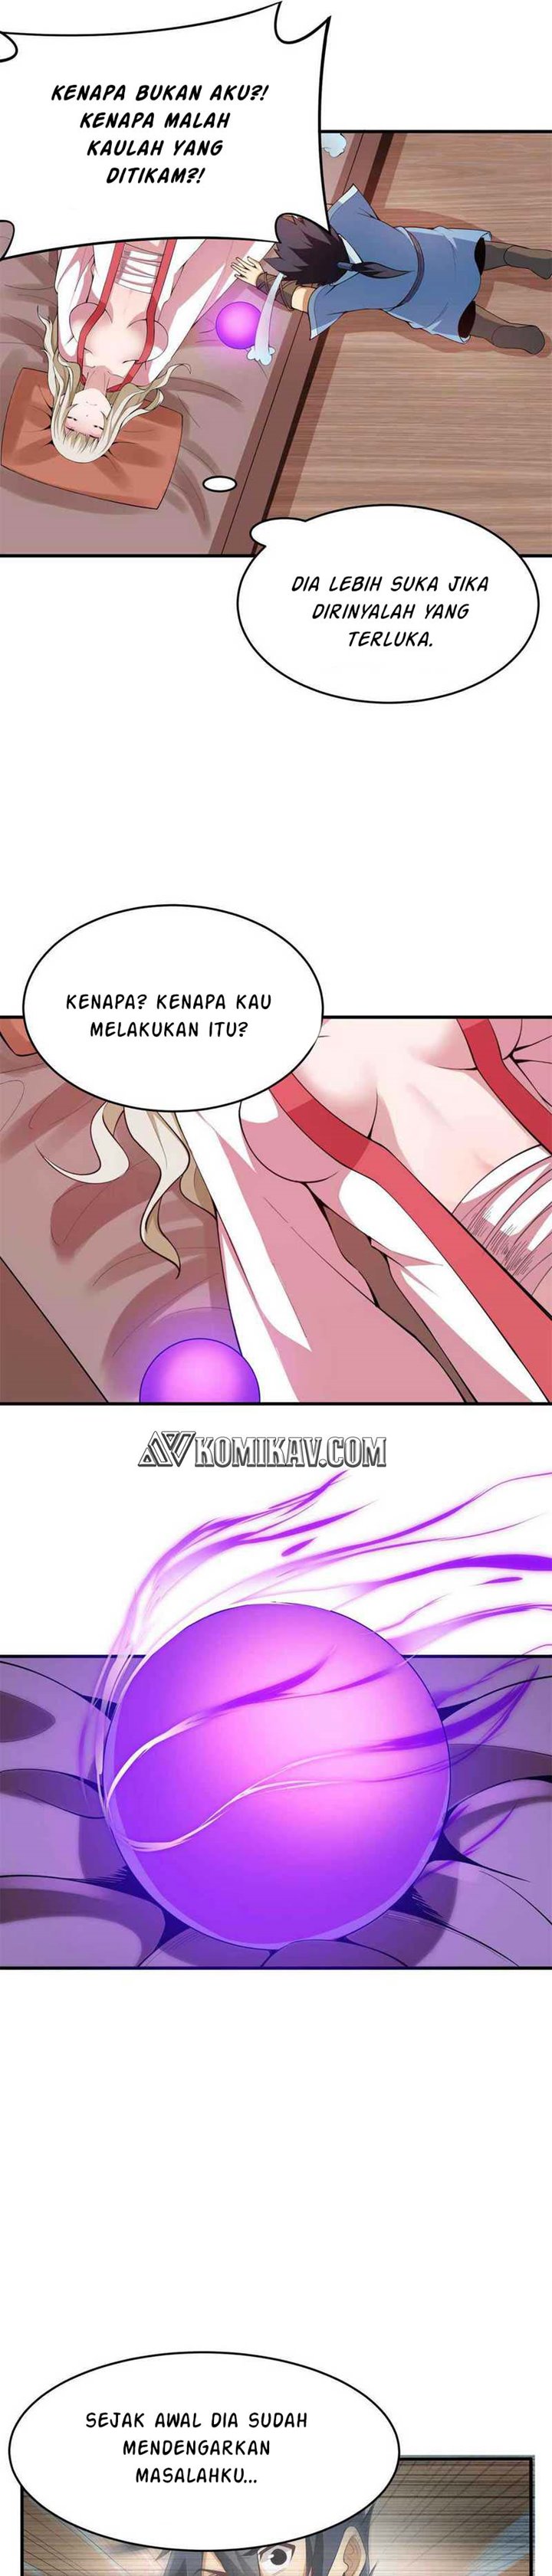 Dilarang COPAS - situs resmi www.mangacanblog.com - Komik i just want to be beaten to death by everyone 020 - chapter 20 21 Indonesia i just want to be beaten to death by everyone 020 - chapter 20 Terbaru 13|Baca Manga Komik Indonesia|Mangacan